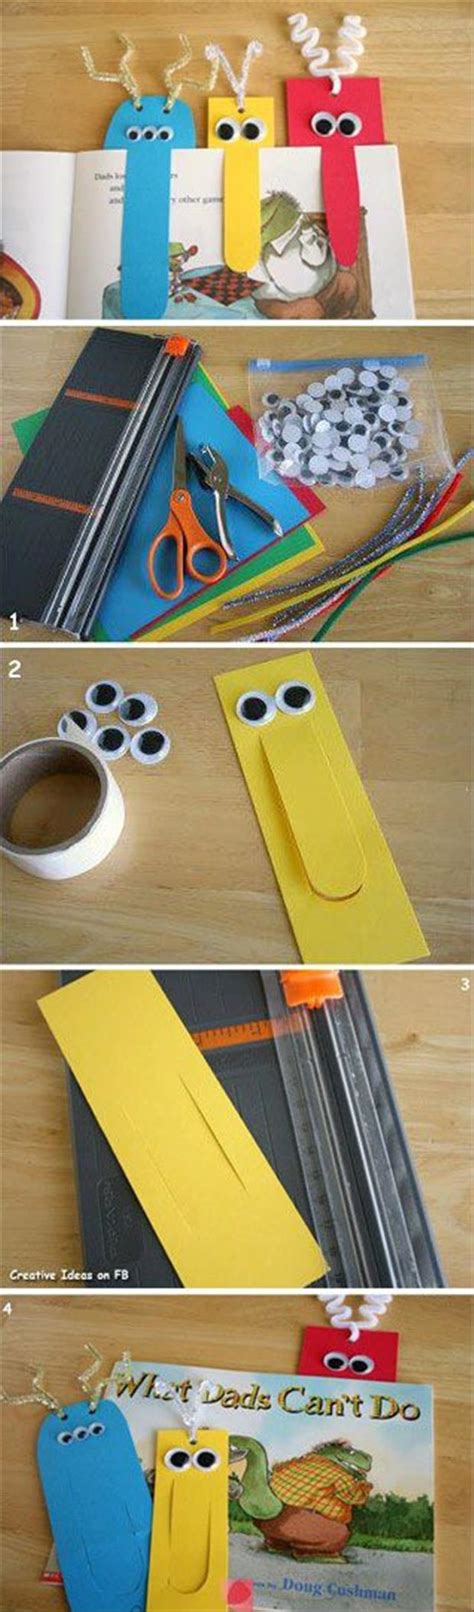 Diy designs and sewing craft ideas find thousands of free crafts. Fun Do It Yourself Craft Ideas - 31 Pics